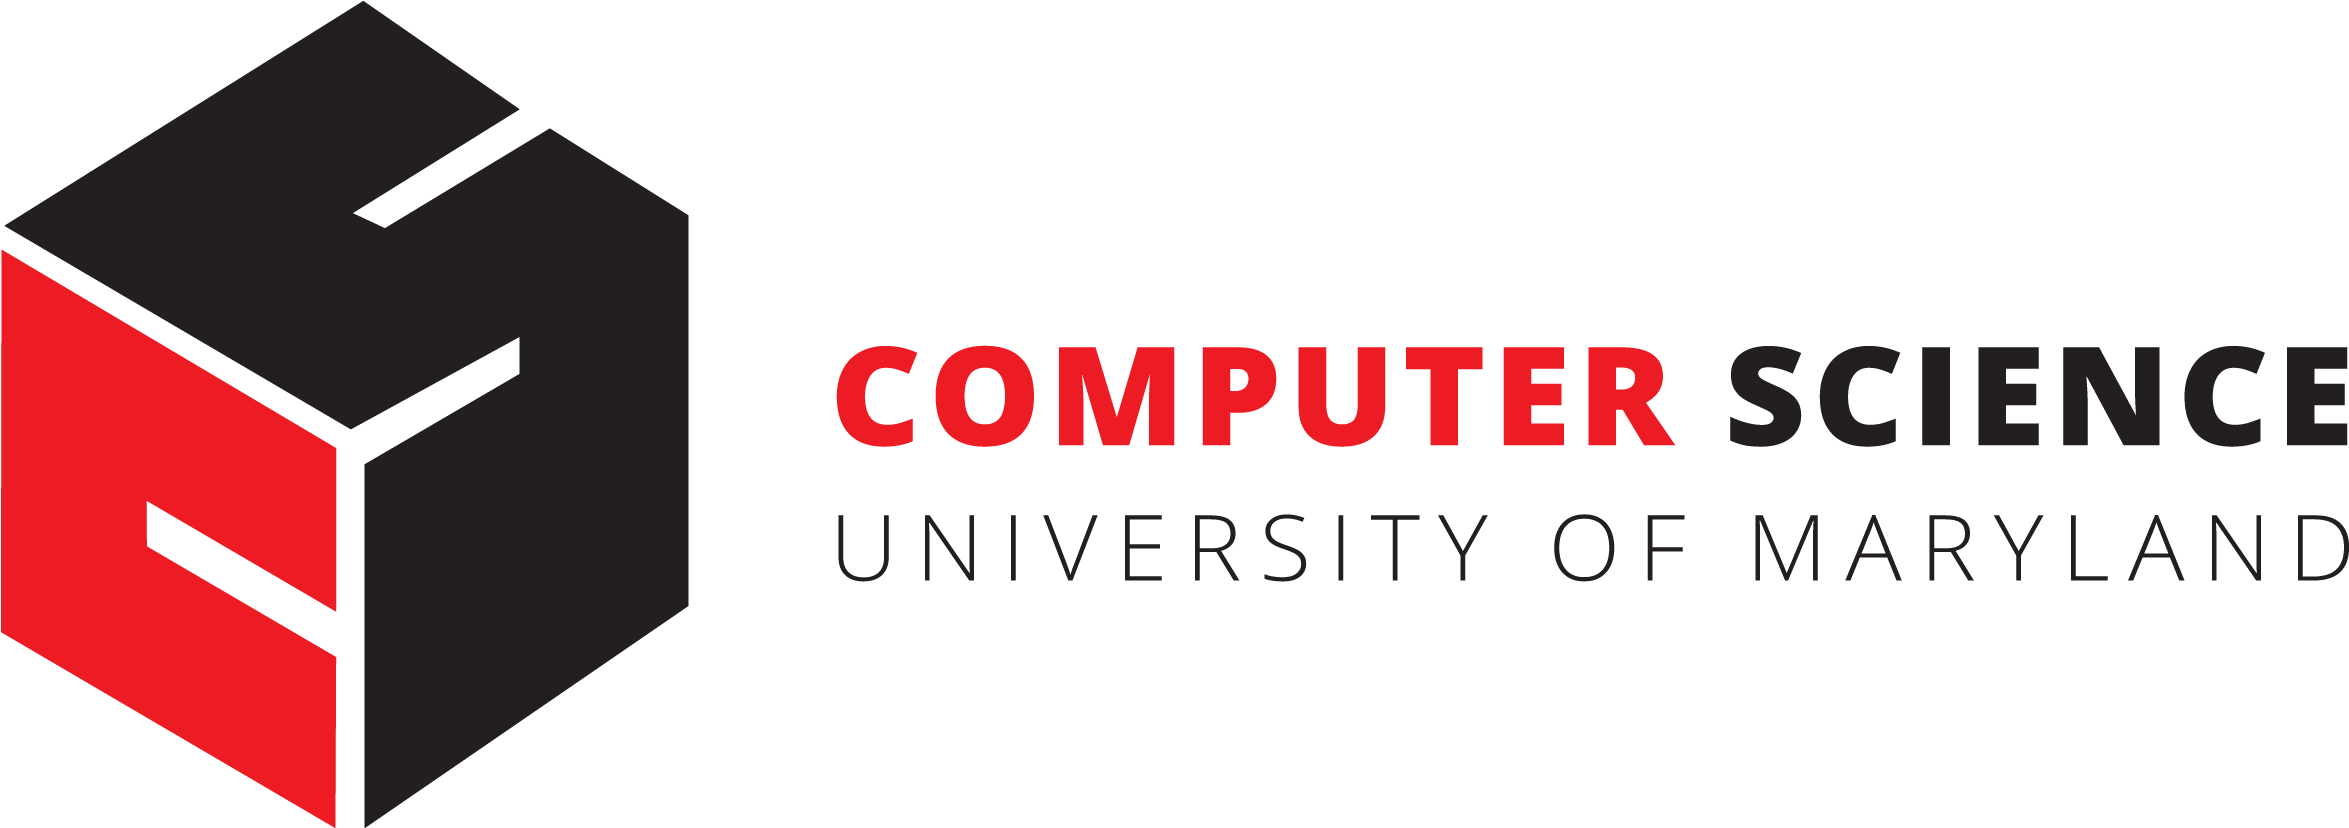 Department Of Computer Science - University Of Maryland Computer Science (2379x827)